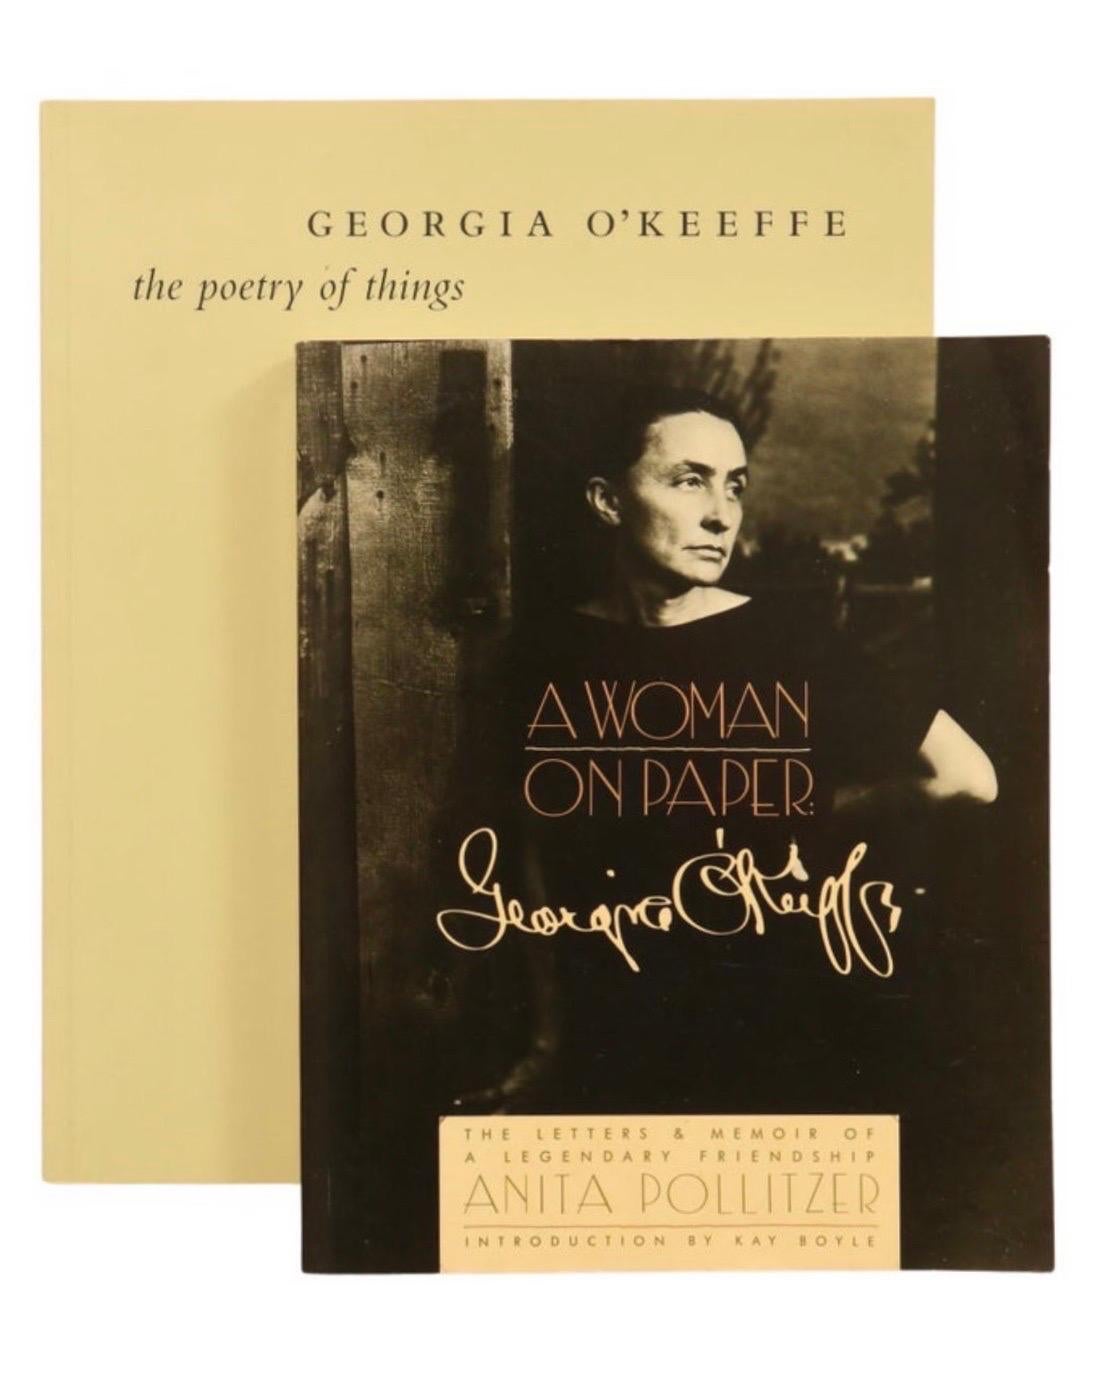 Two Georgia O'Keeffe softcover books. A Woman on Paper, published in 1988, 294 pages. The Poetry of Things, published in 1999, 158 pages.